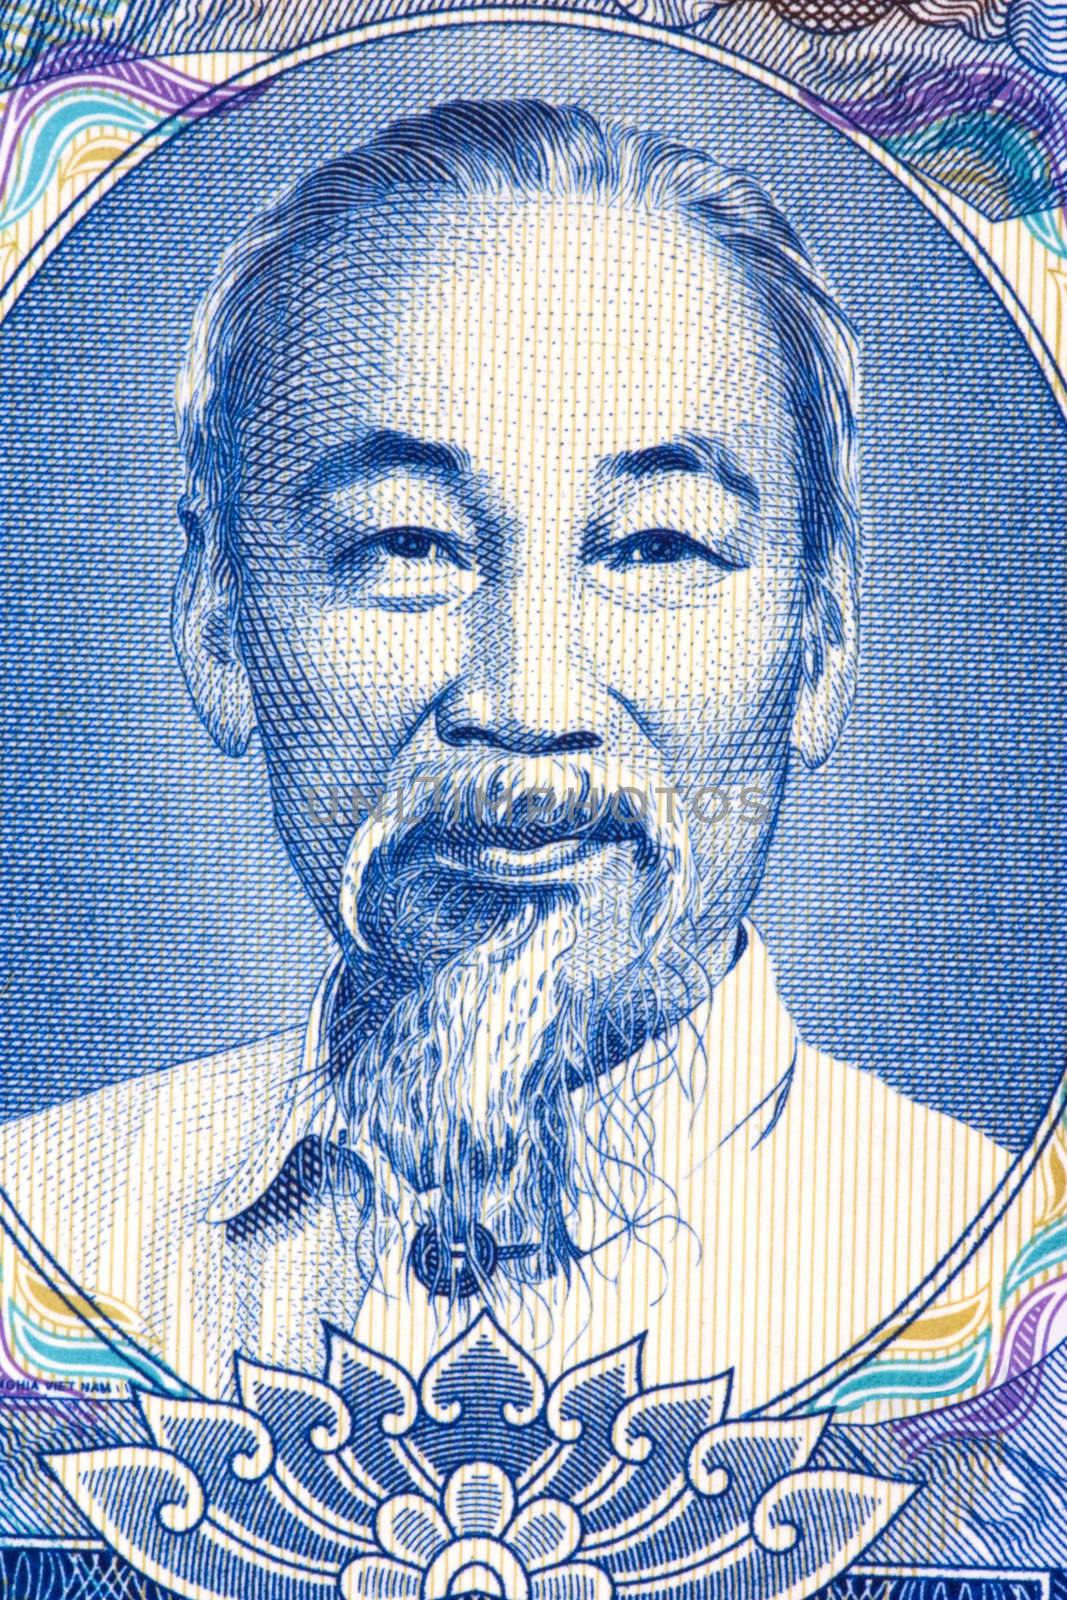 Macro image of Ho Chi Minh on an old currency note.